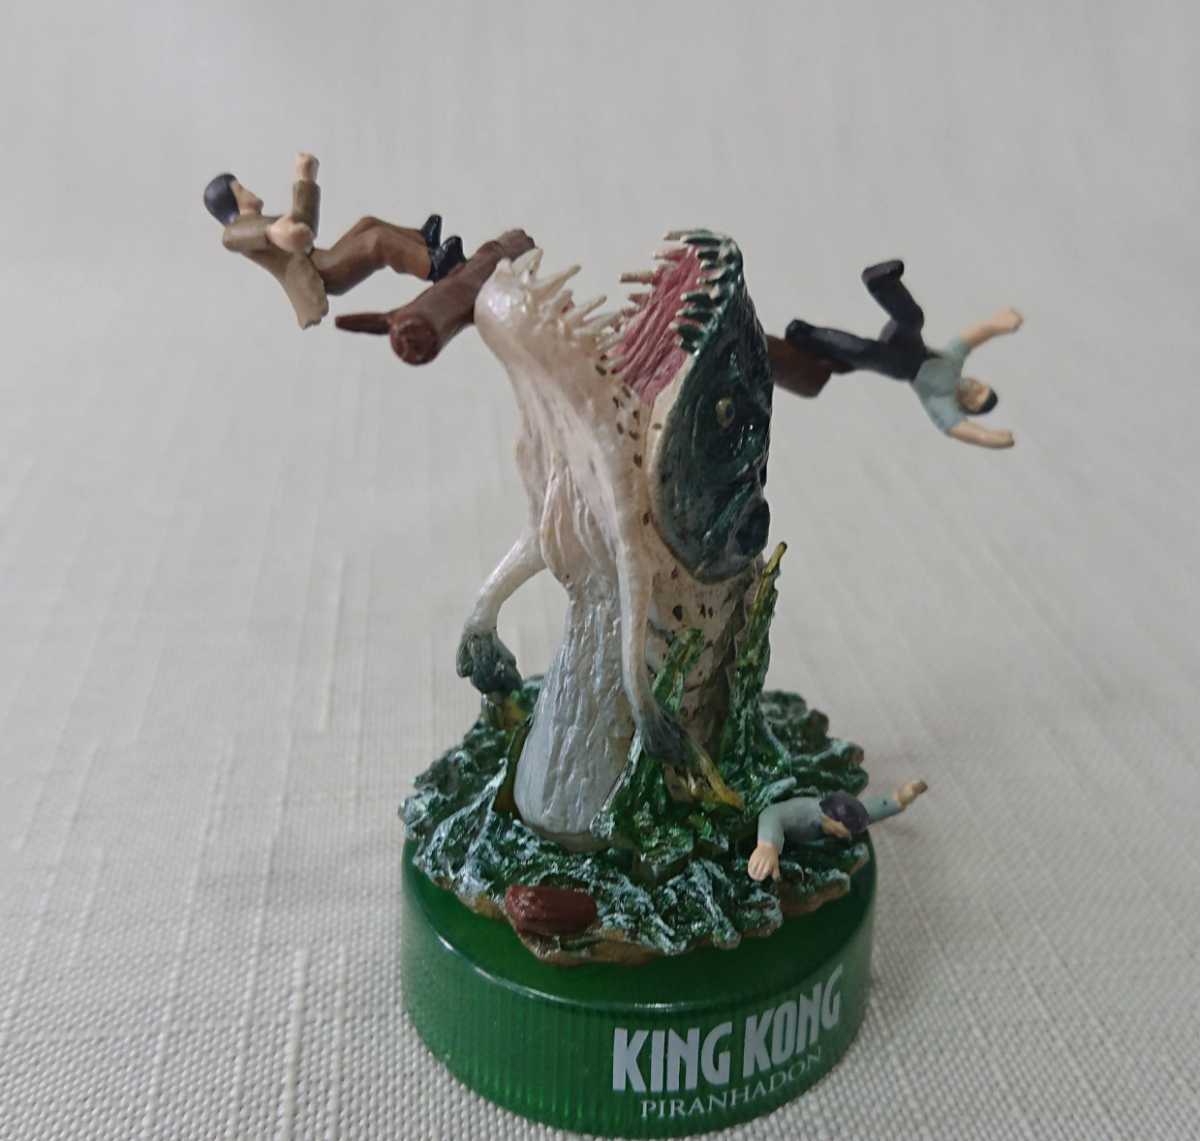 * seven eleven limitation [ King Kong ] Kaiyodo figure collection (#7 water bottom from ..)*